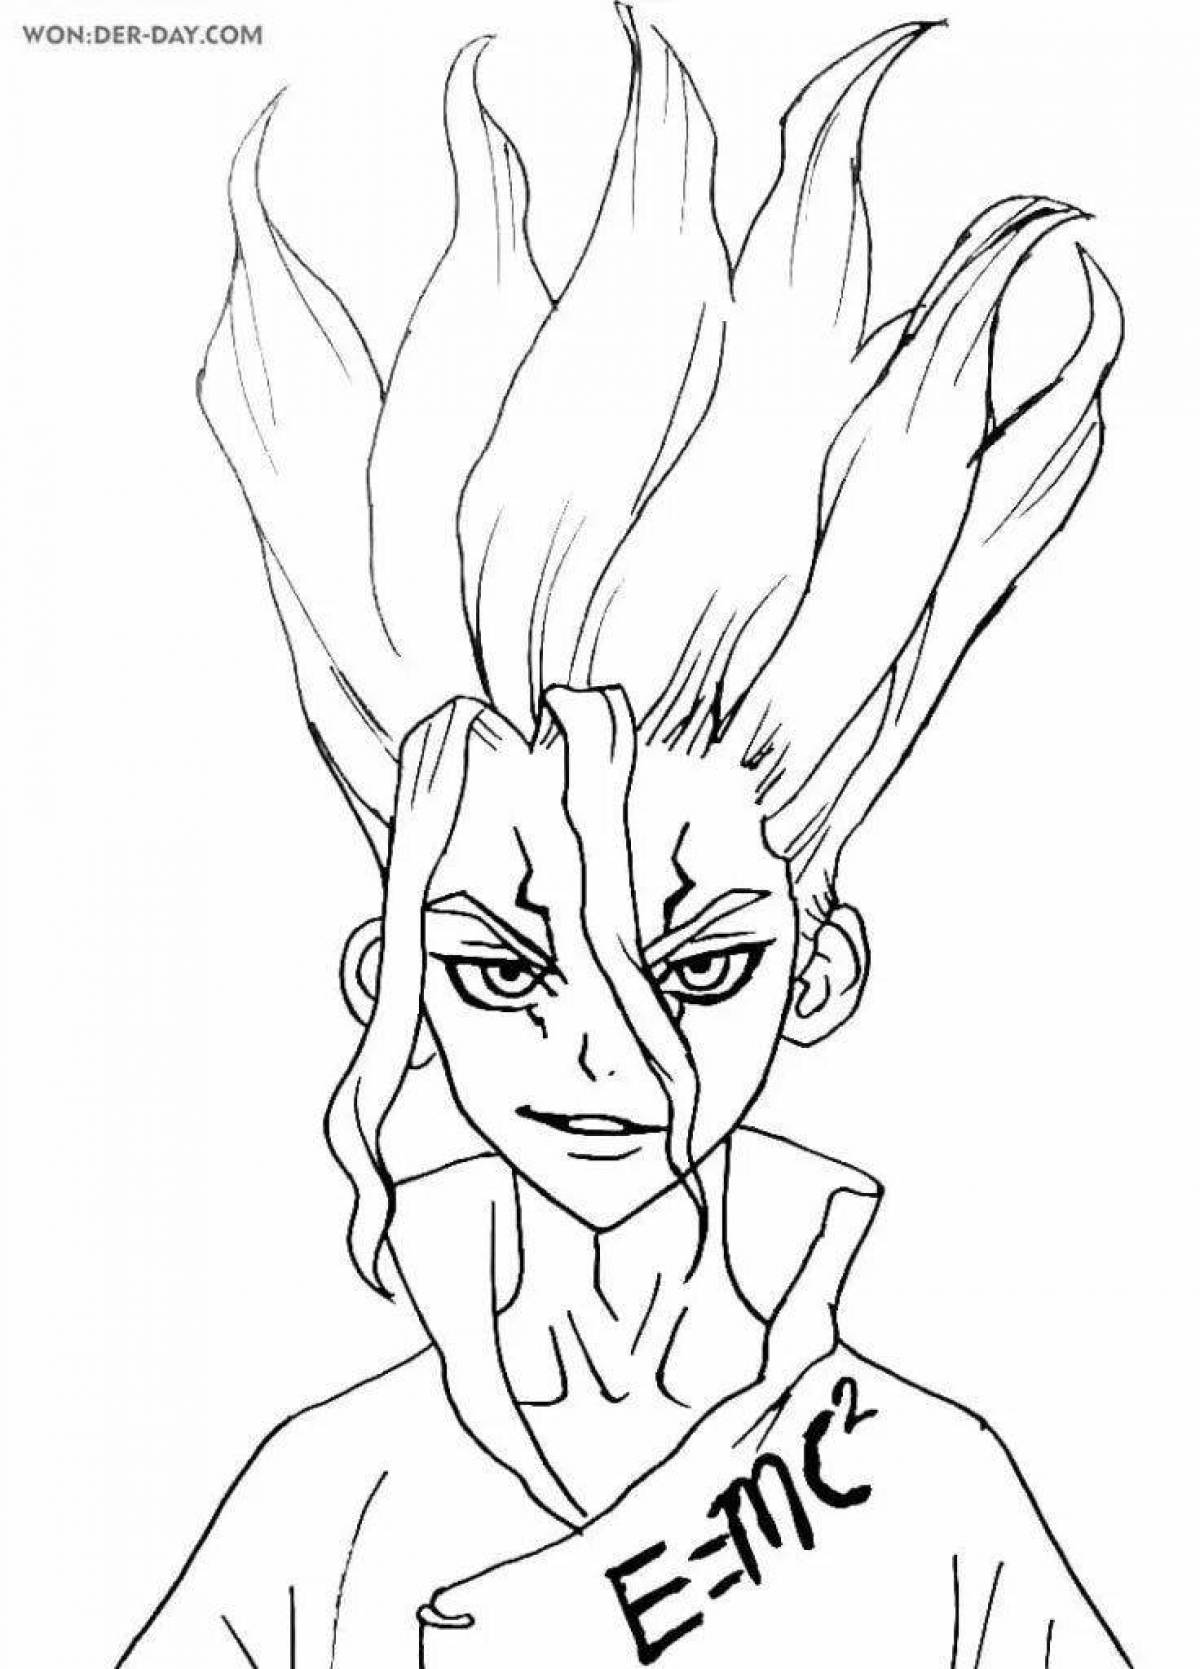 Dr. stone's vibrant coloring page